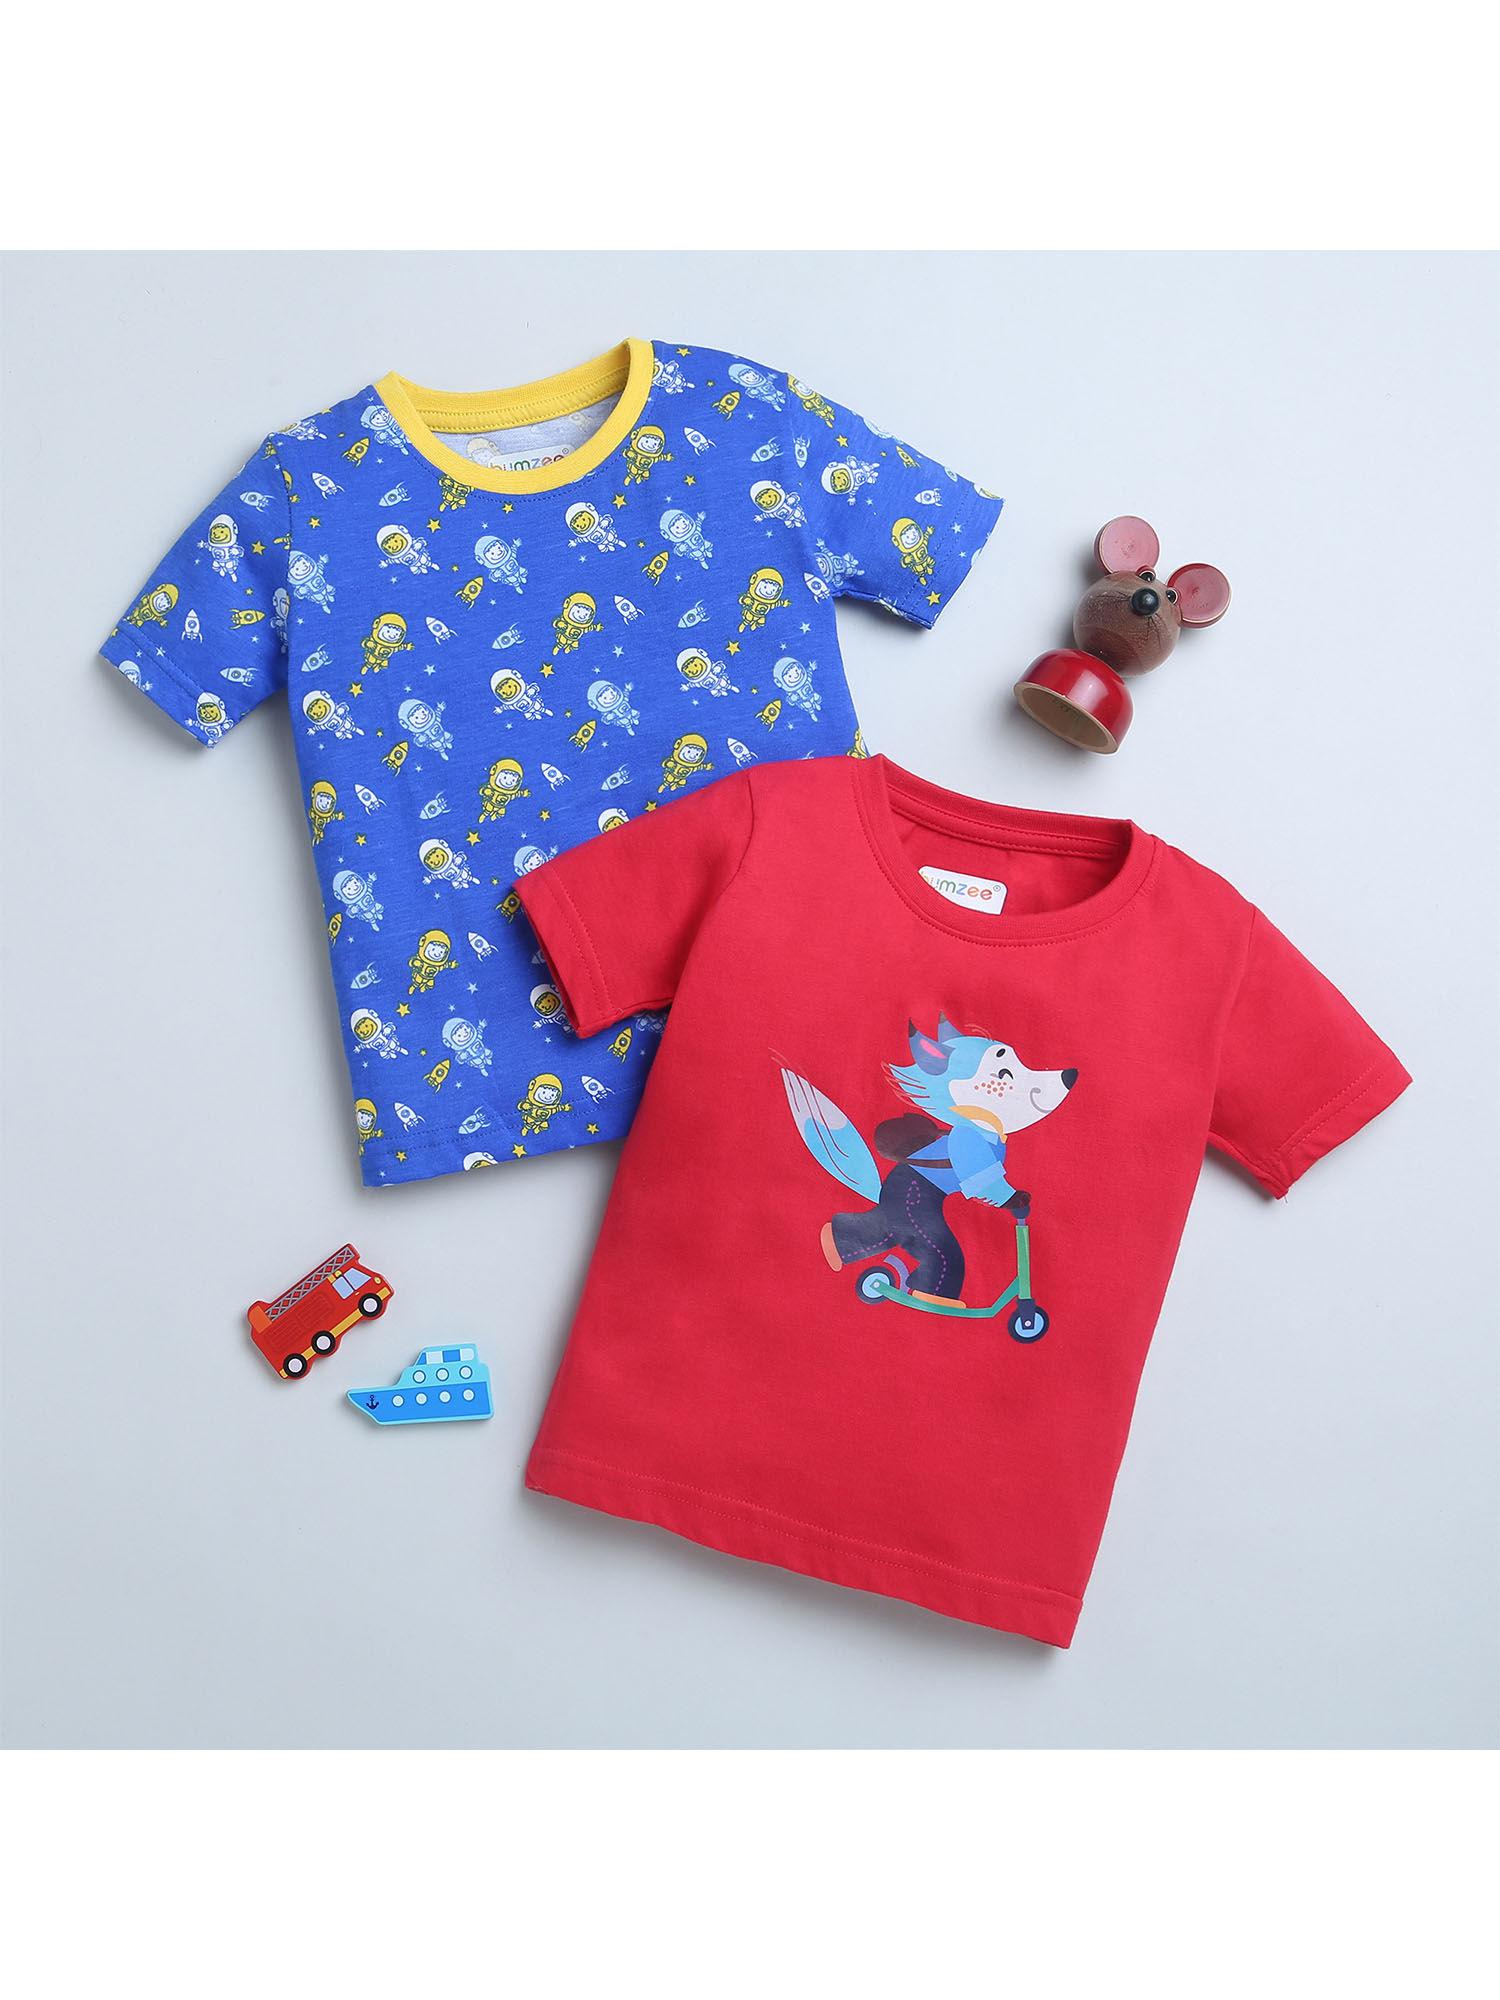 blue and red boys half sleeves t-shirt (set of 2)